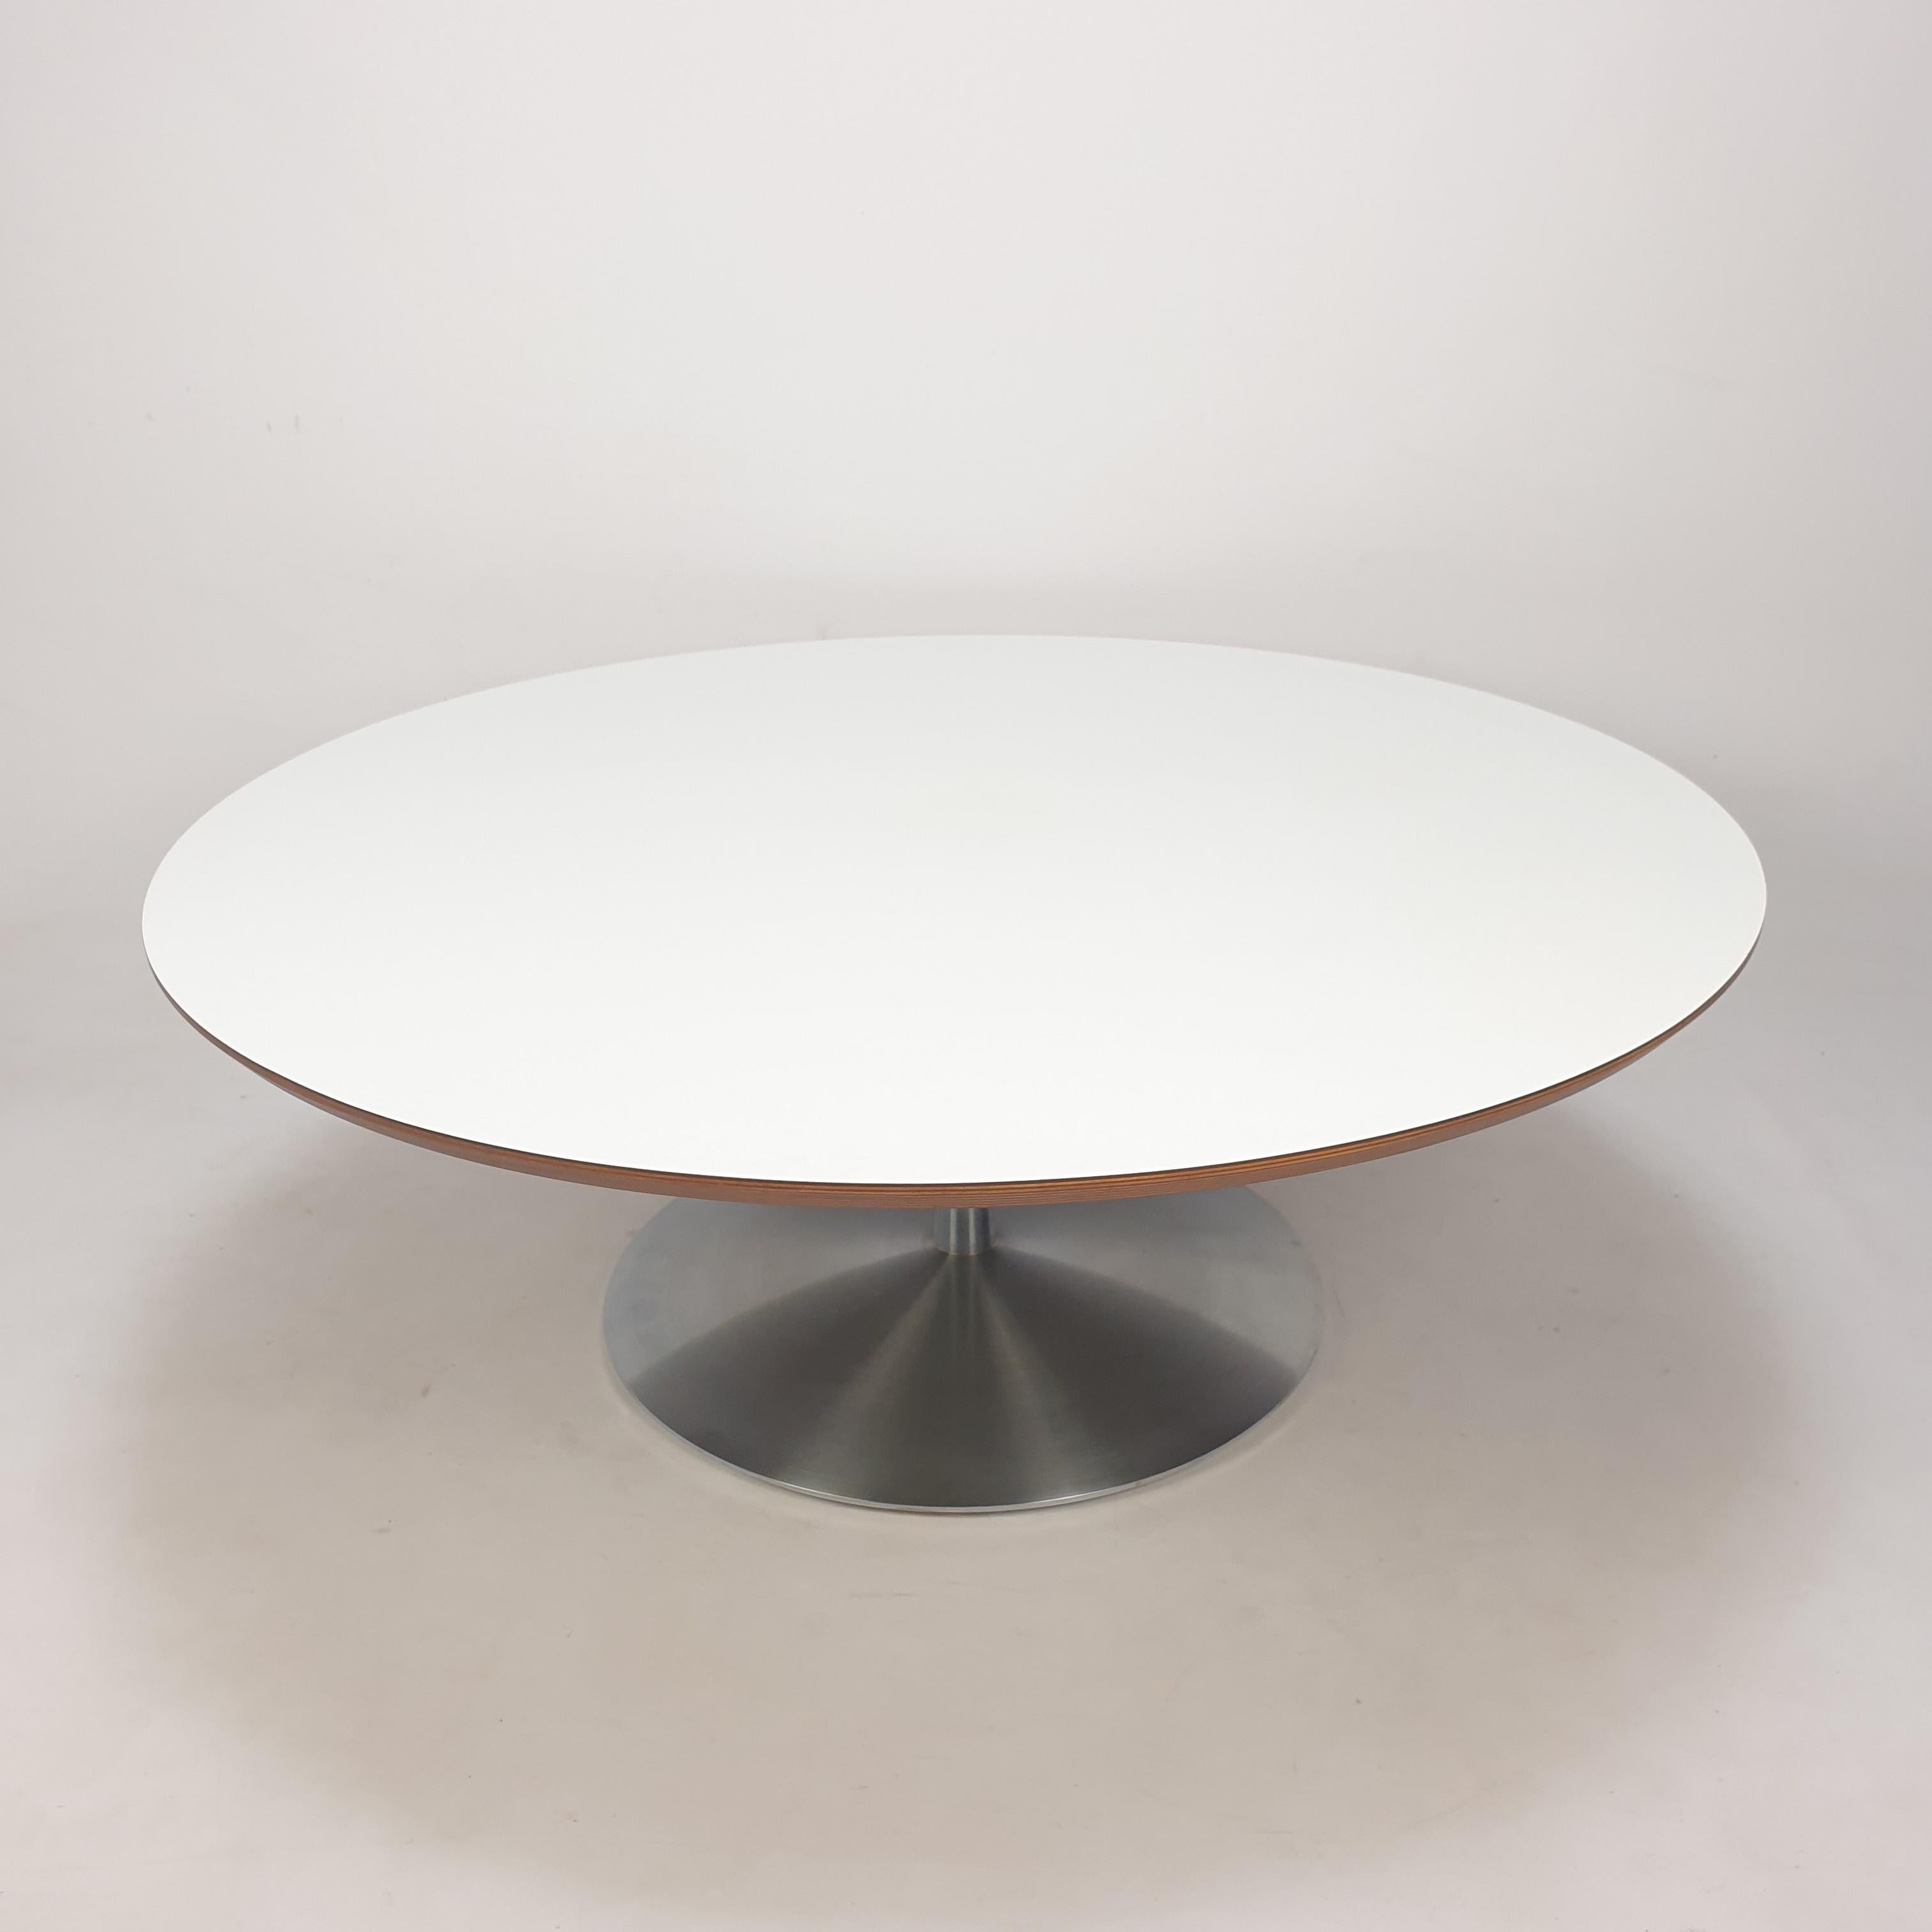 Very nice round coffee table, designed by Pierre Paulin in the 60's. 
This particular table is fabricated in the 70's.

The name of the table is 